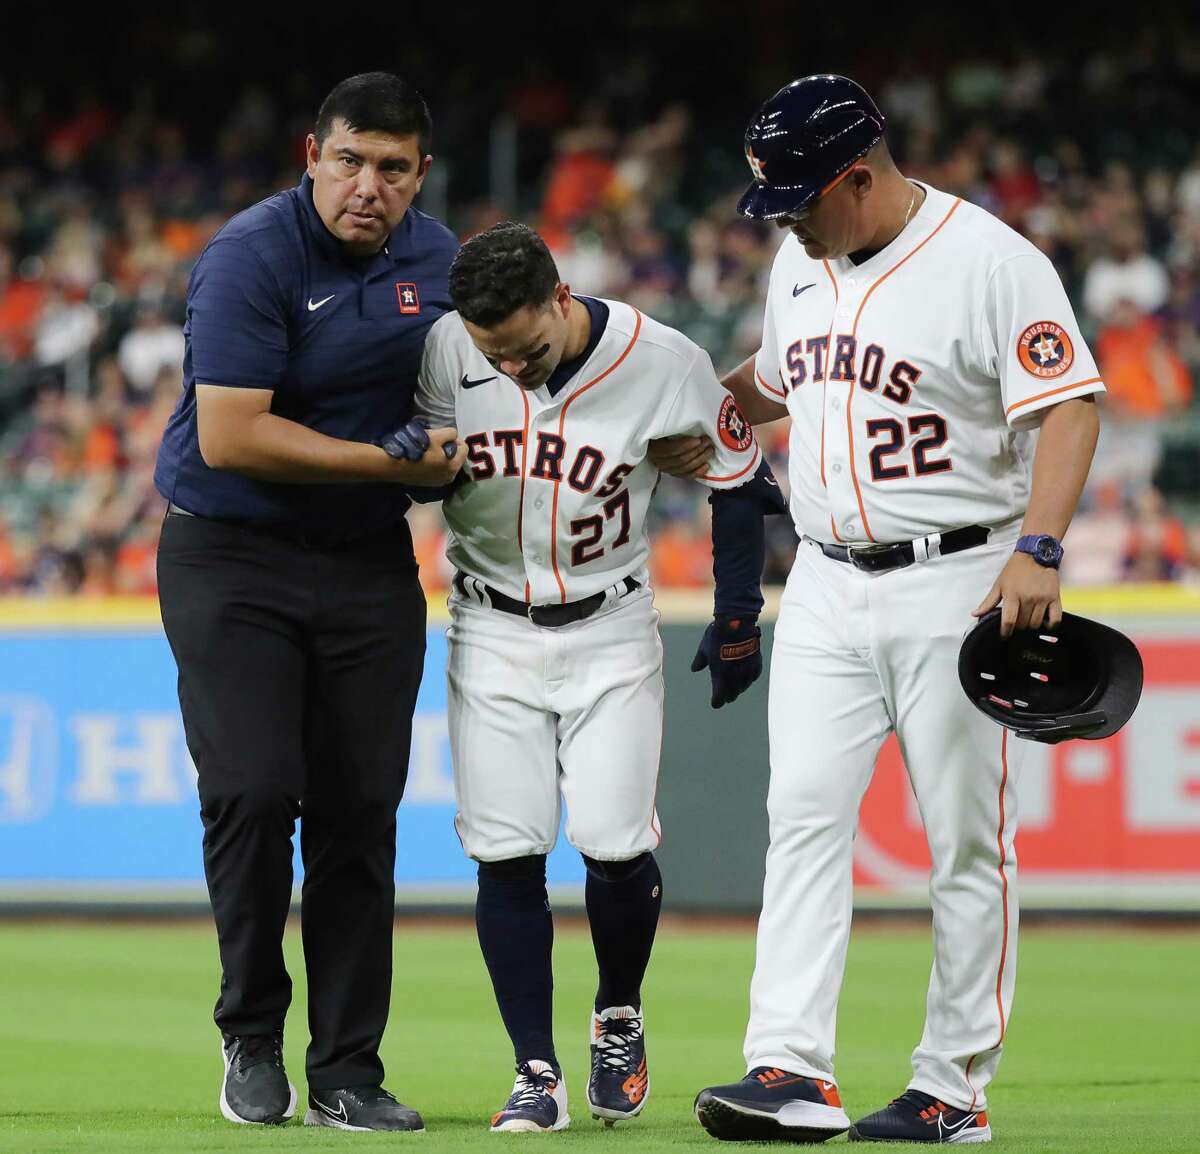 HOUSTON, TEXAS - APRIL 18: Jose Altuve #27 of the Houston Astros is helped off the field by first base coach Omar Lopez #22 and a trainer after injuring himself running out an infield hit in the eighth inning against the Los Angeles Angels at Minute Maid Park on April 18, 2022 in Houston, Texas.